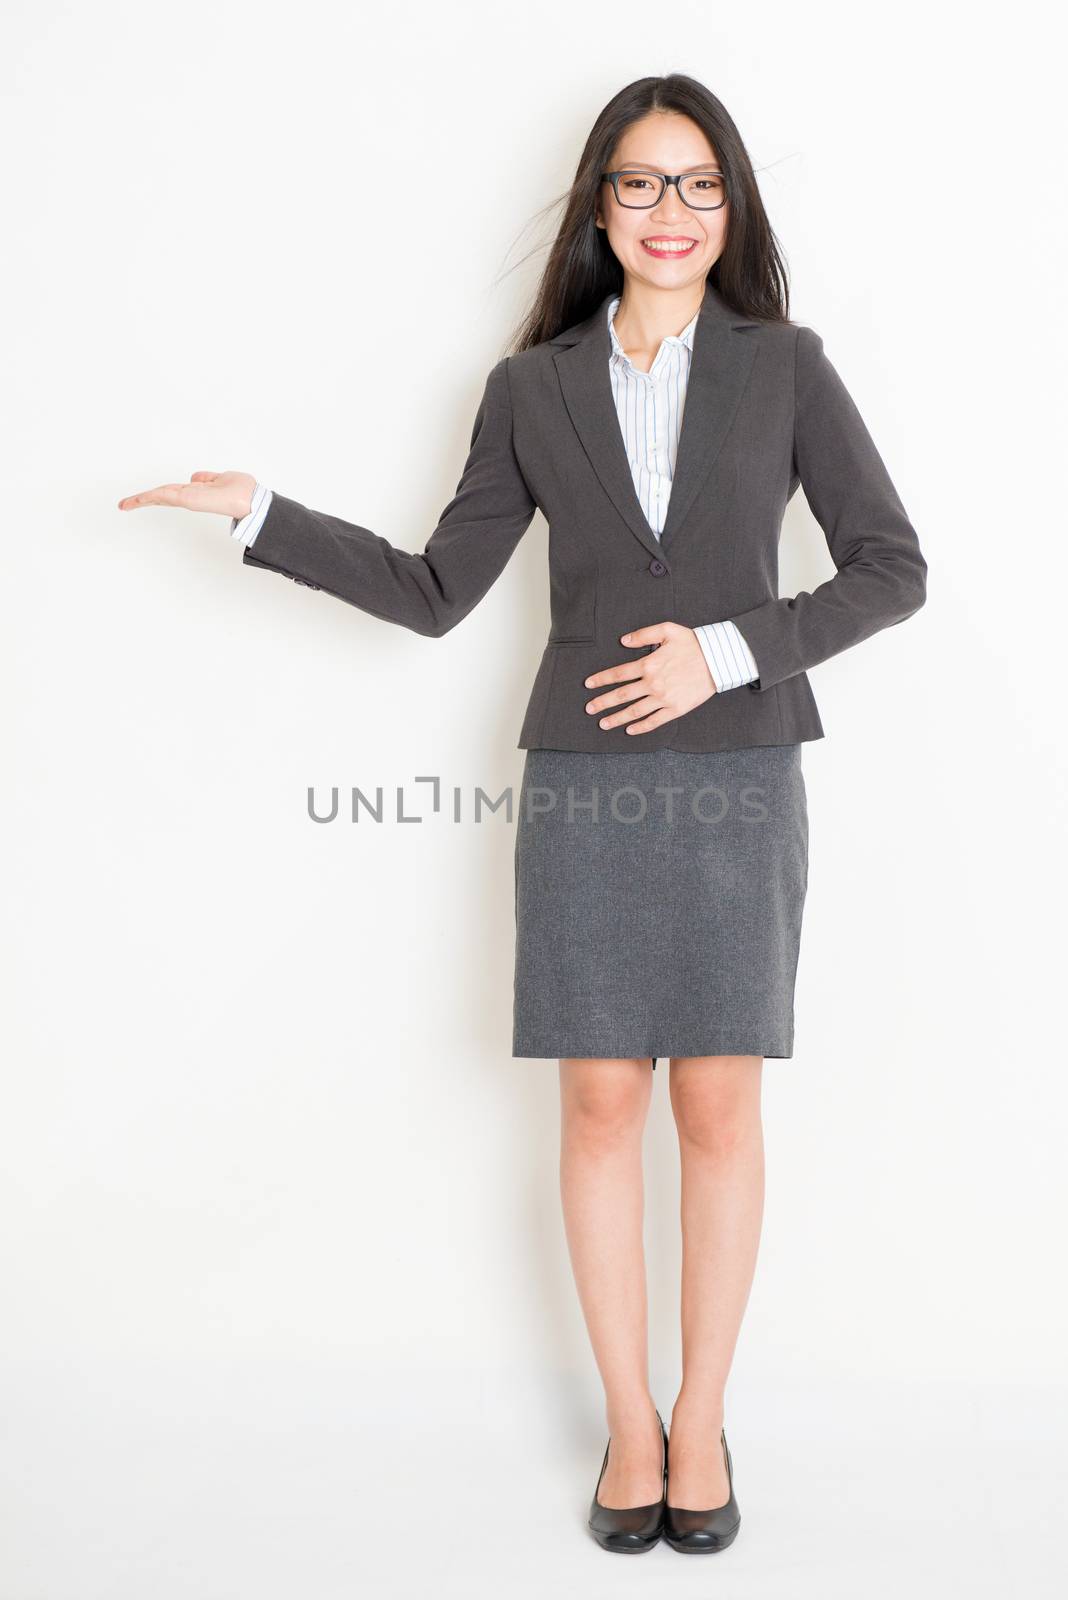 Portrait of Asian businesswoman in formalwear hand showing something and smiling, full body standing on plain background.